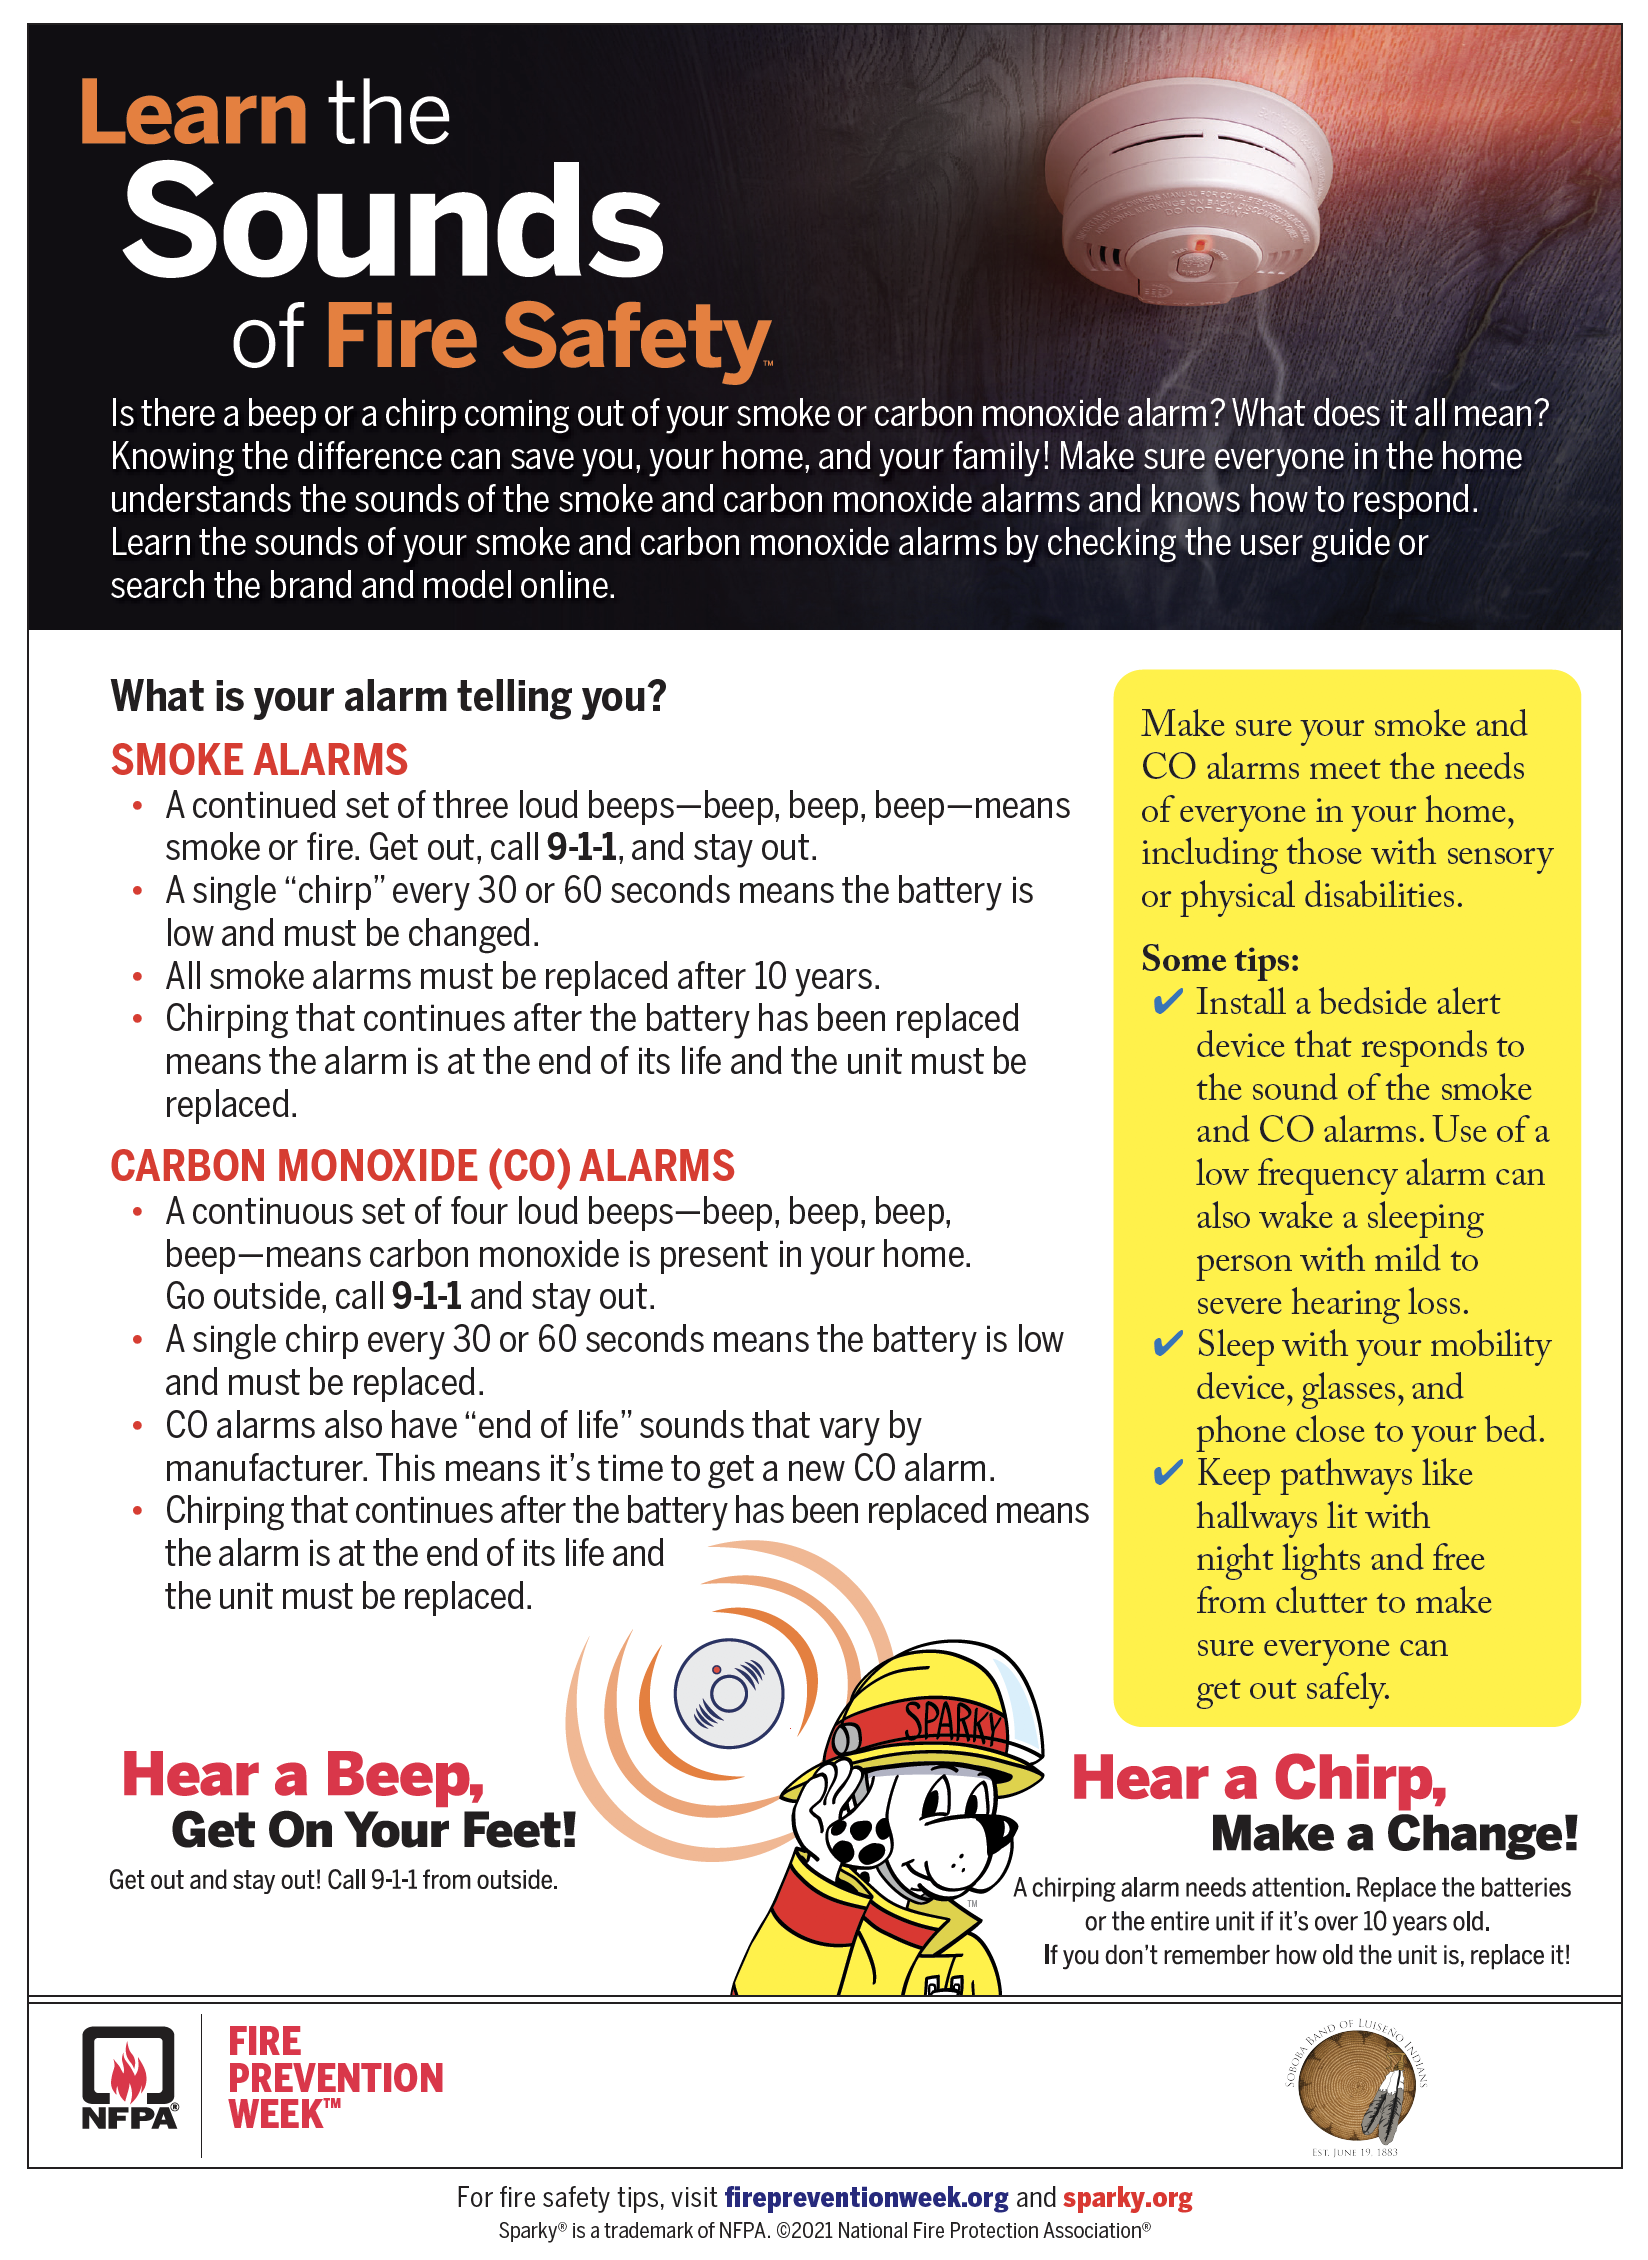 Learn the Sounds of Fire Safety